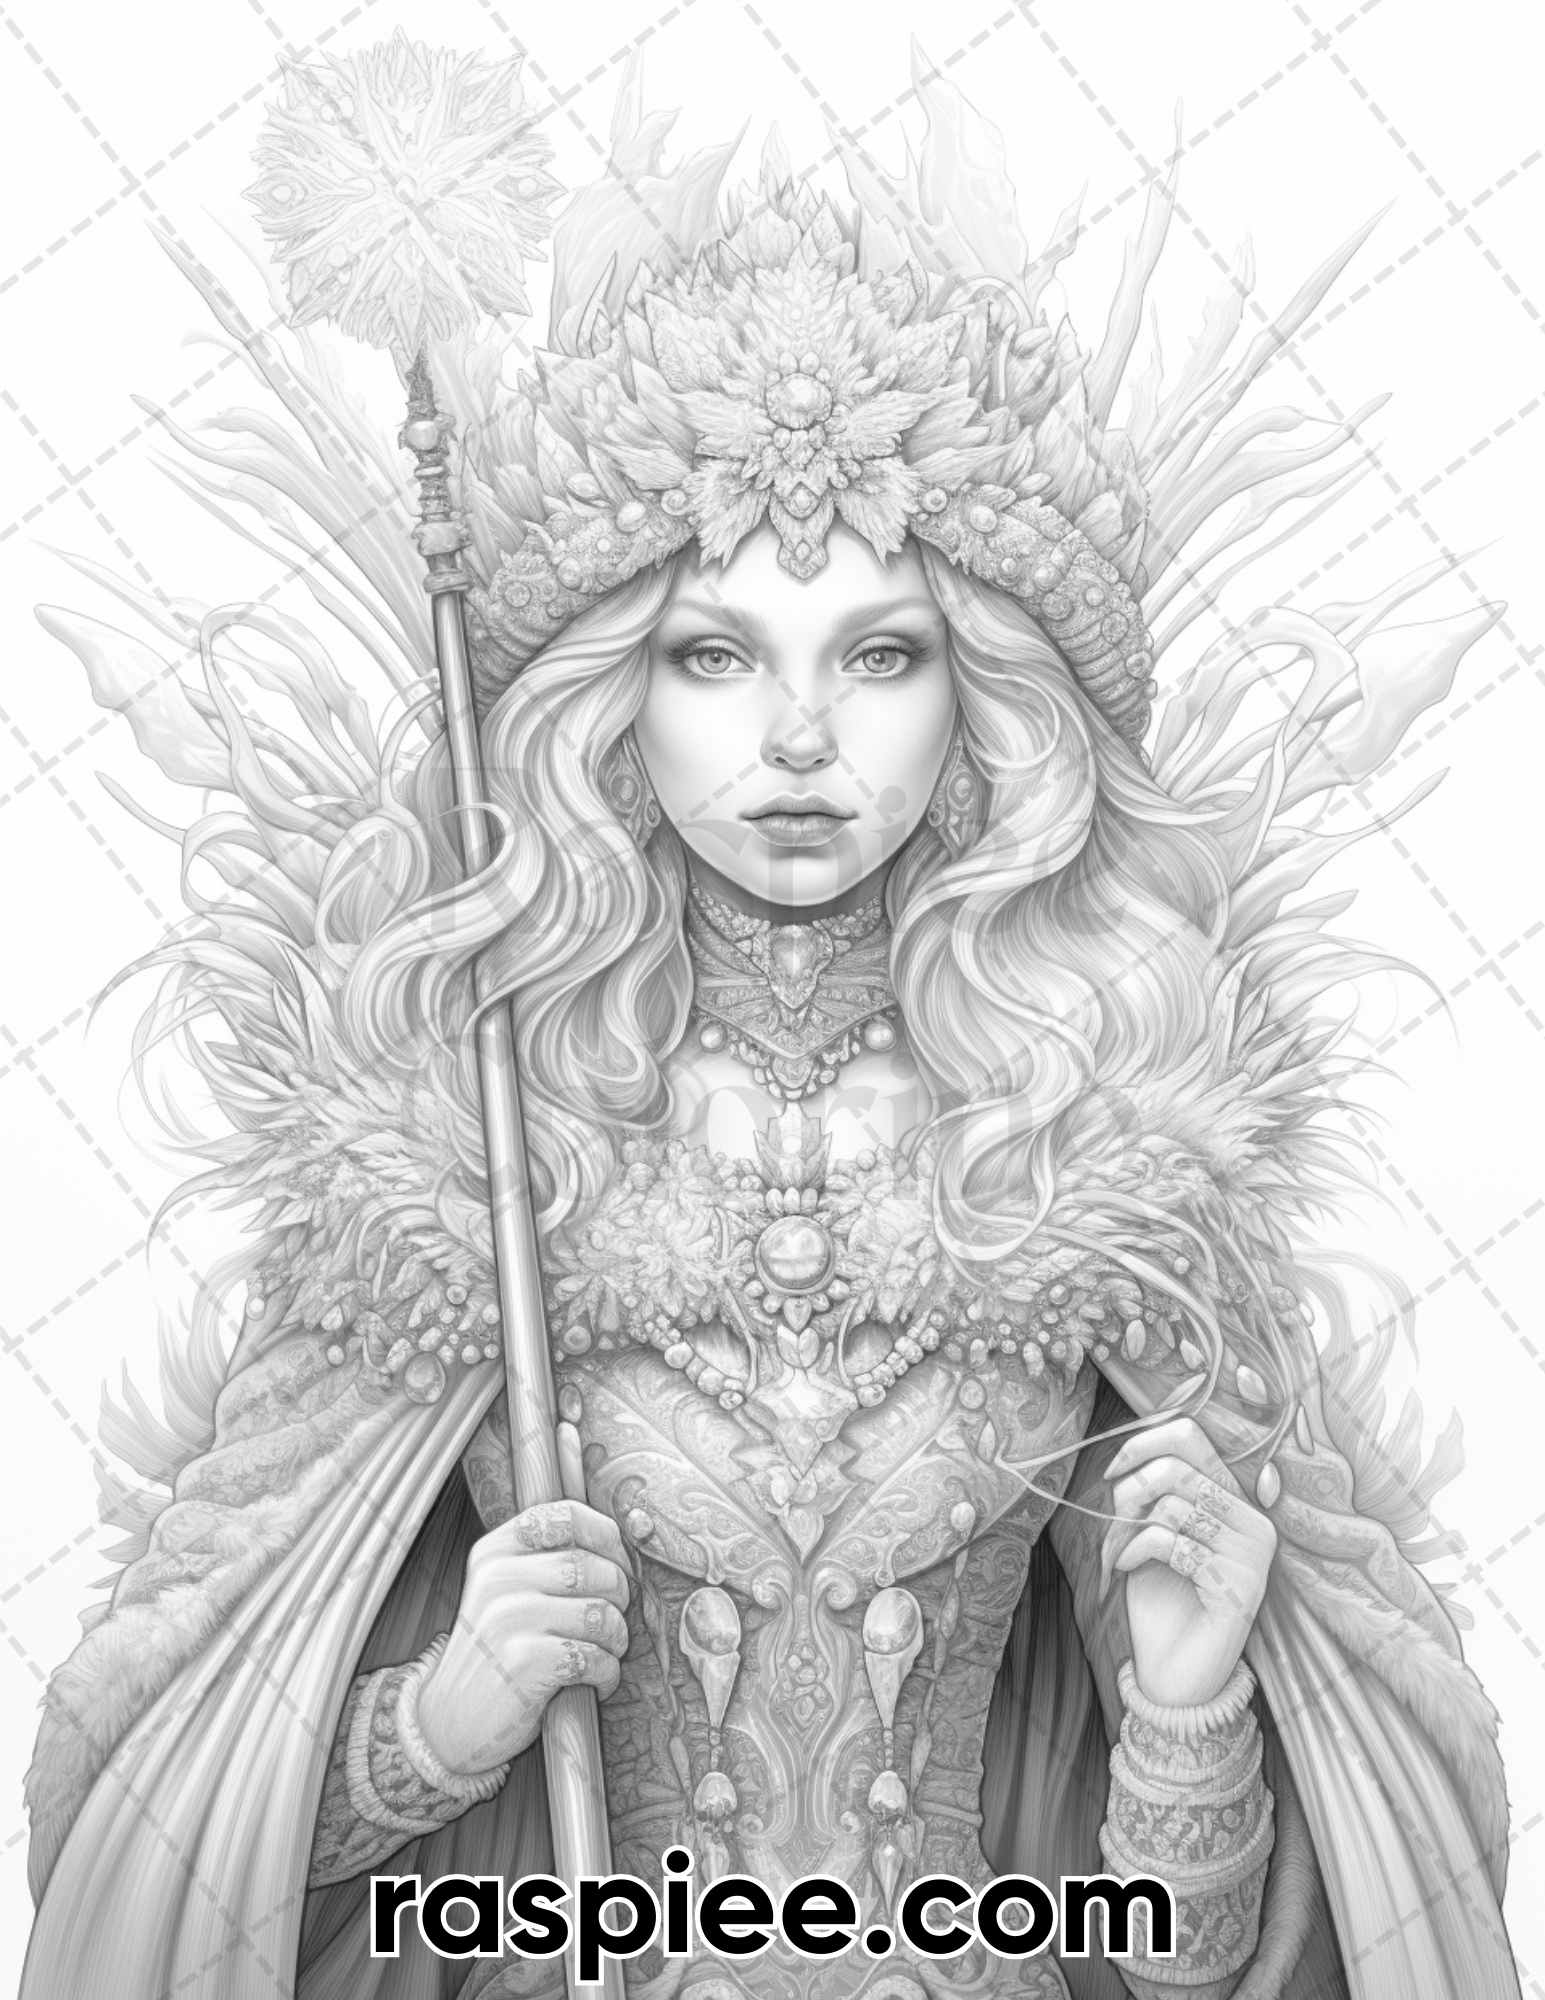 Winter Wonderland Coloring Pages, Winter Coloring Pages for Adults, Winter Coloring Book Printbale, Fantasy Coloring Pages for Adults